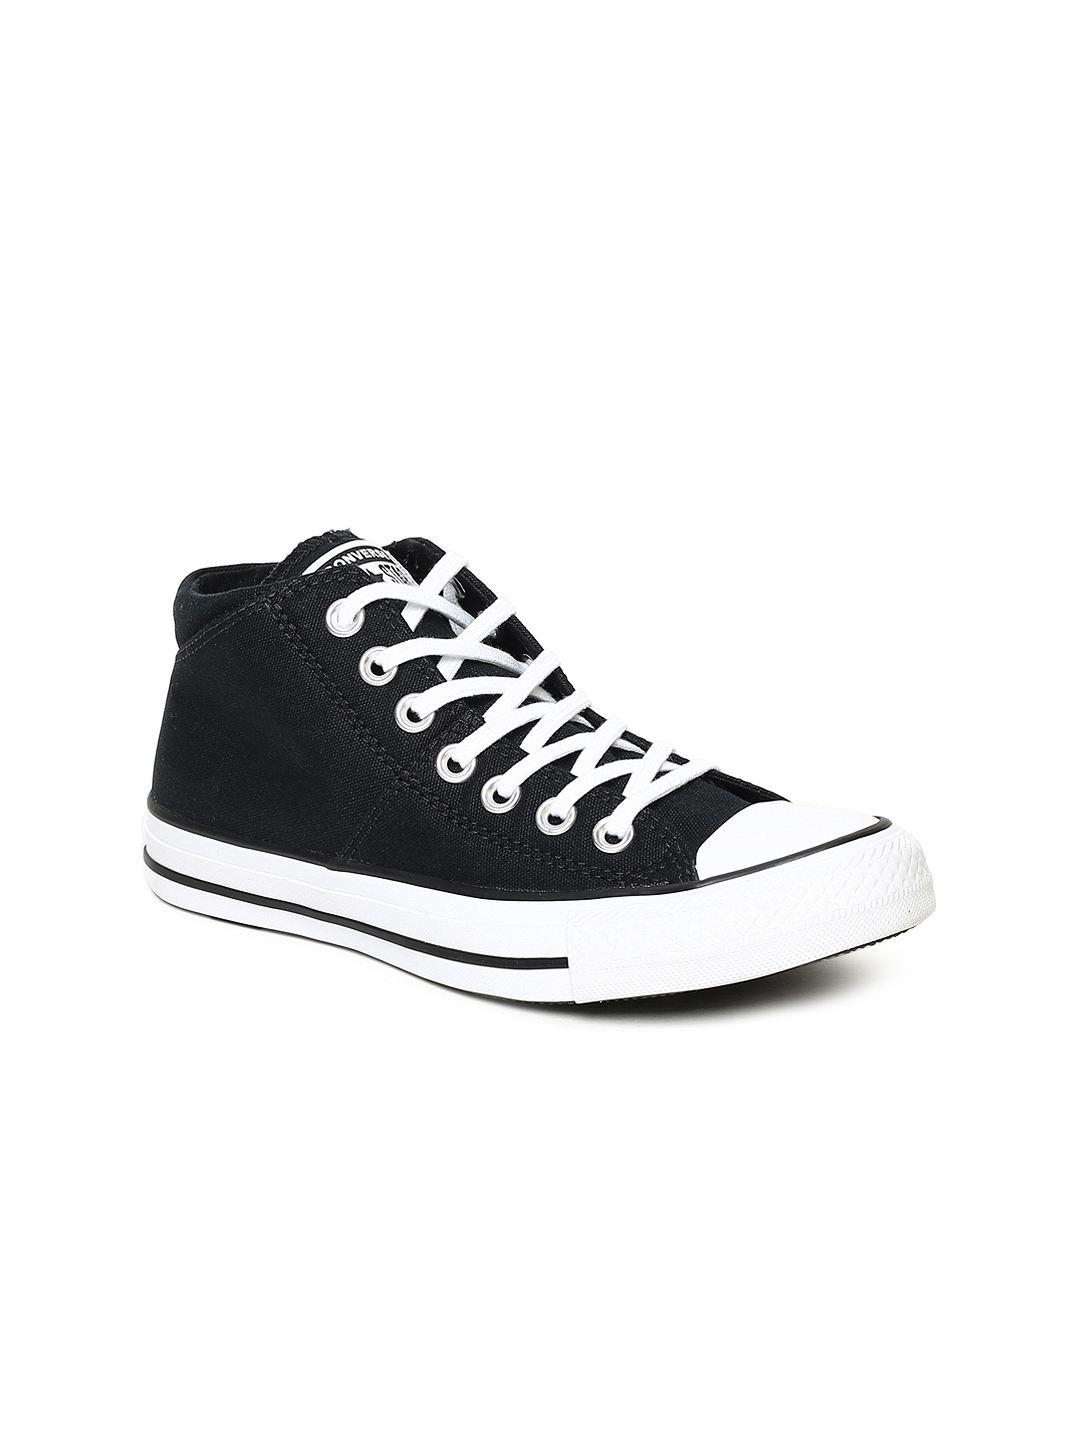 Buy Converse Women Black Printed Canvas Mid Top Sneakers - Casual Shoes for  Women 8552701 | Myntra